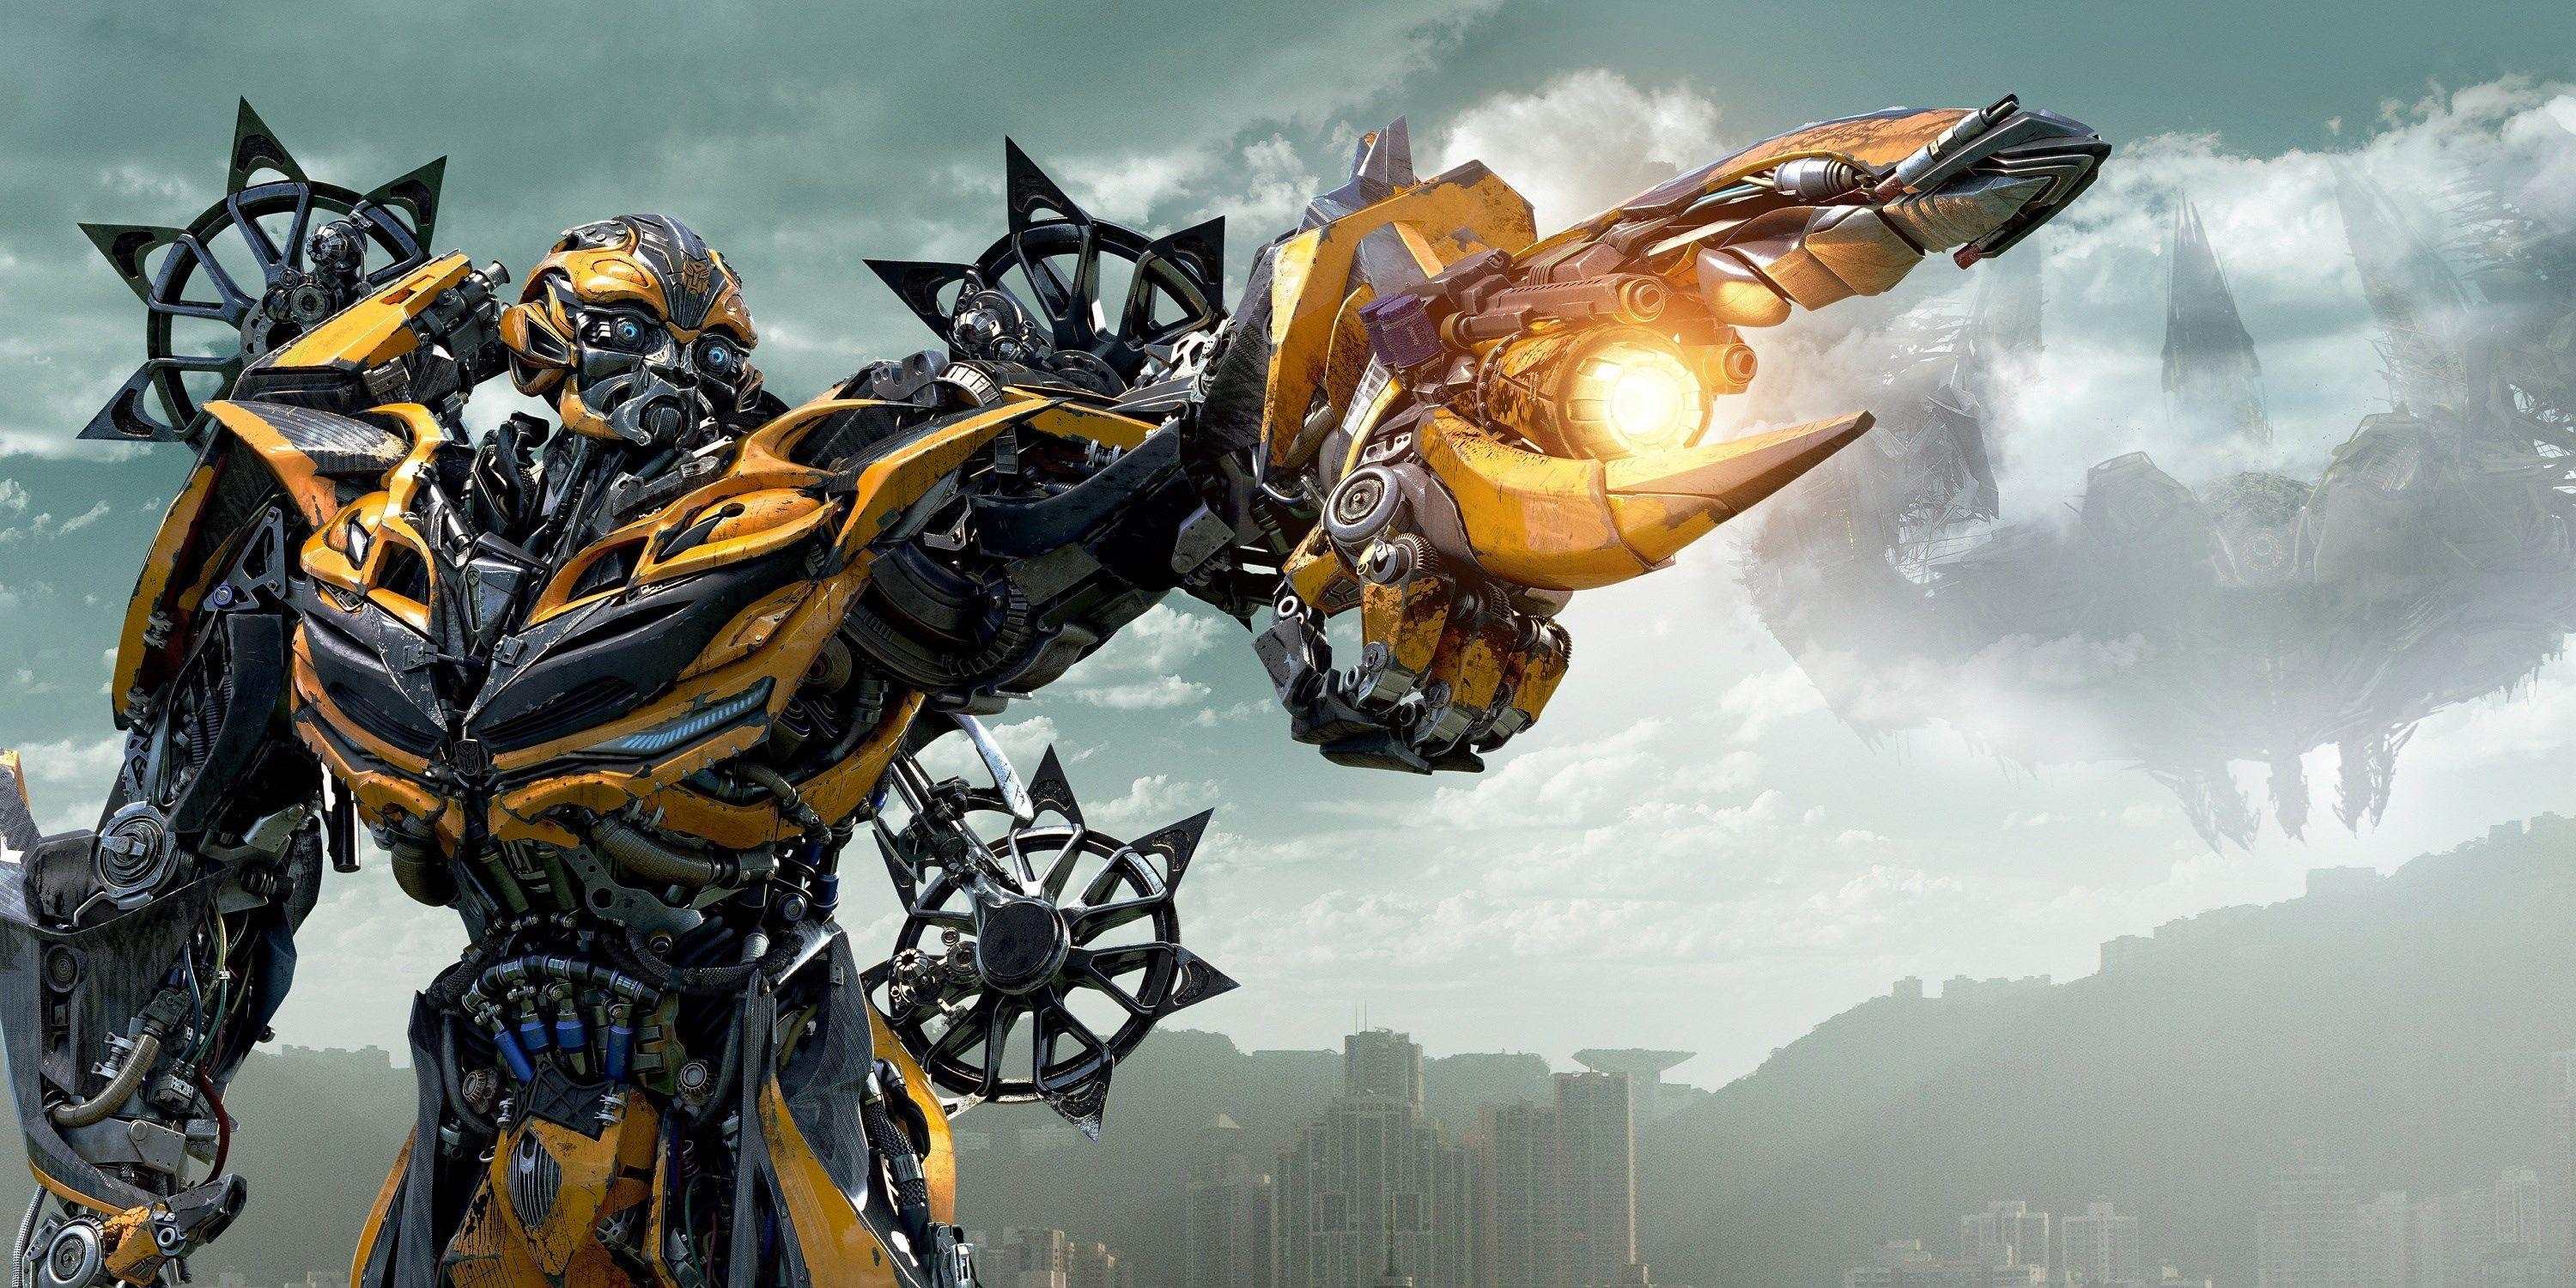 bumblebee transformers 4 age of extinction free wallpaper HD. Transformers age of extinction, Transformers age, Transformers movie